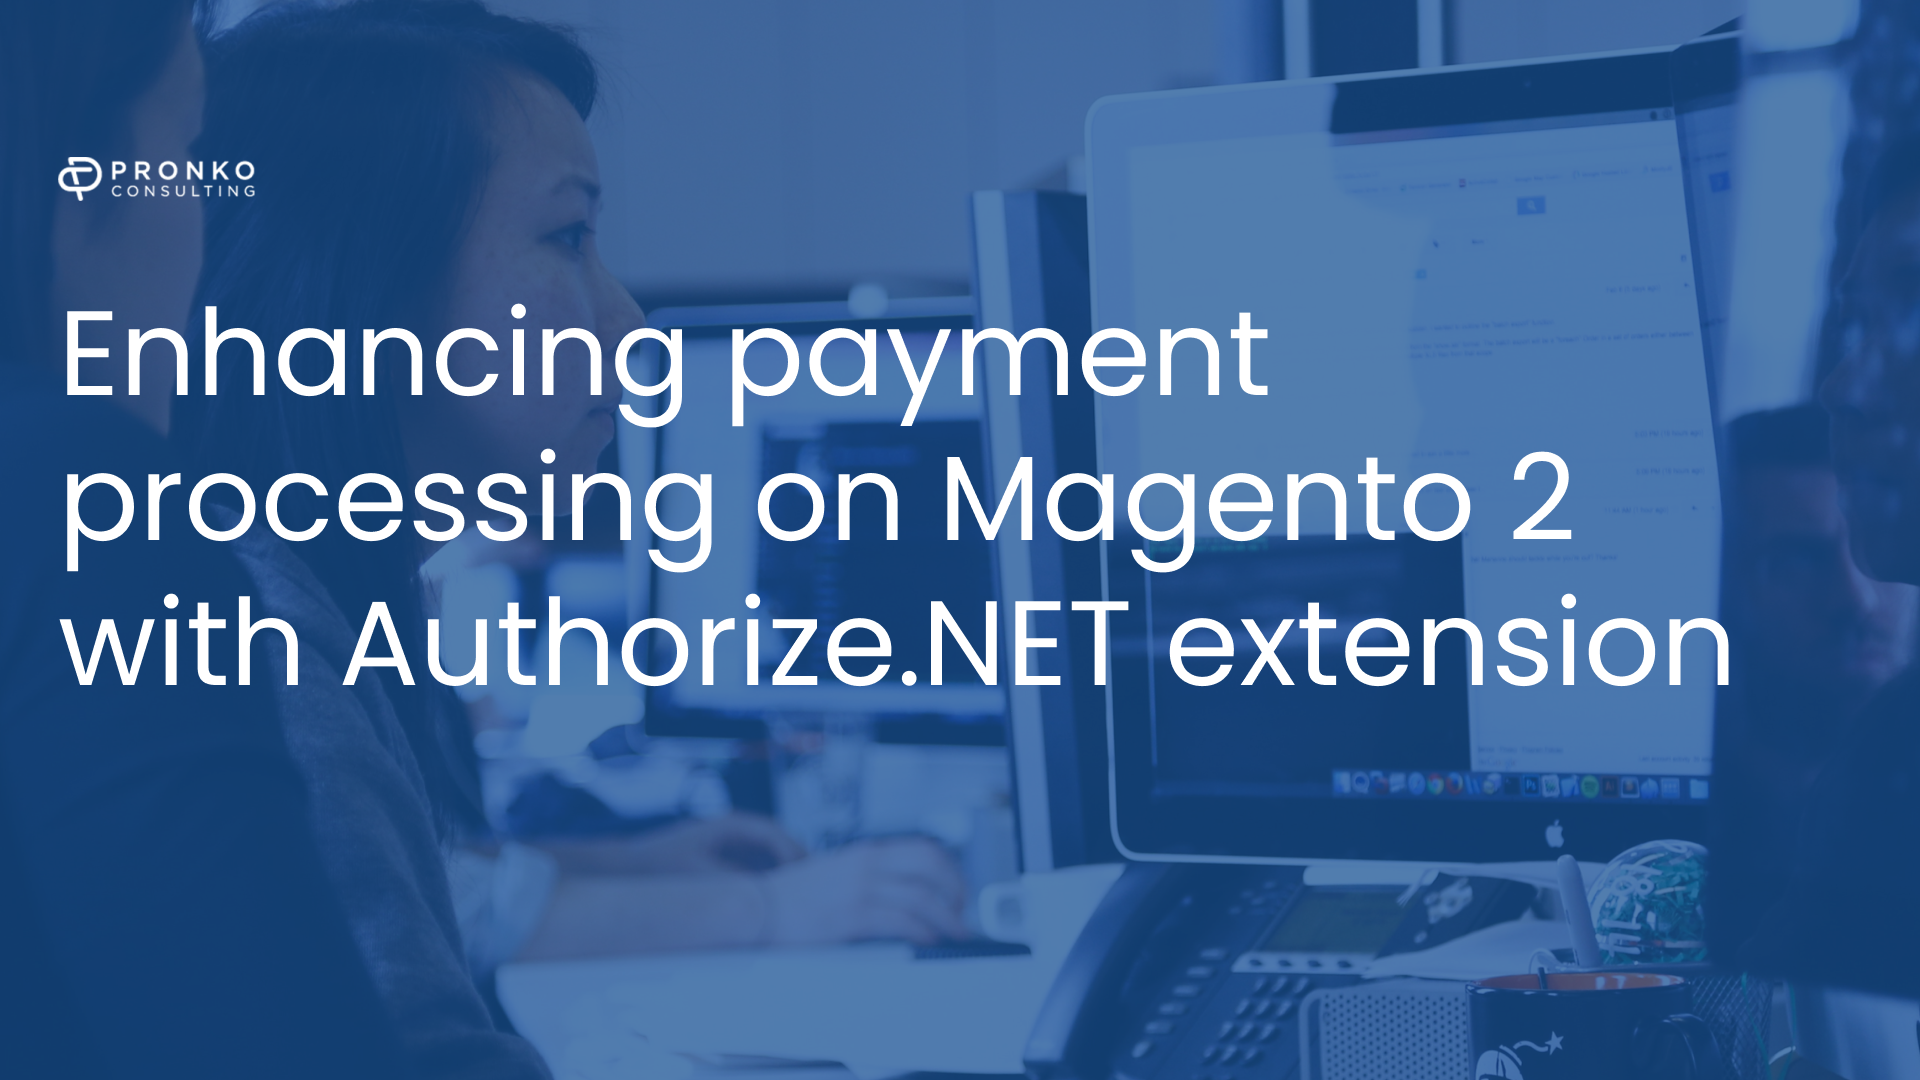 Unlock secure online payment processing with Magento 2's Authorize.NET extension